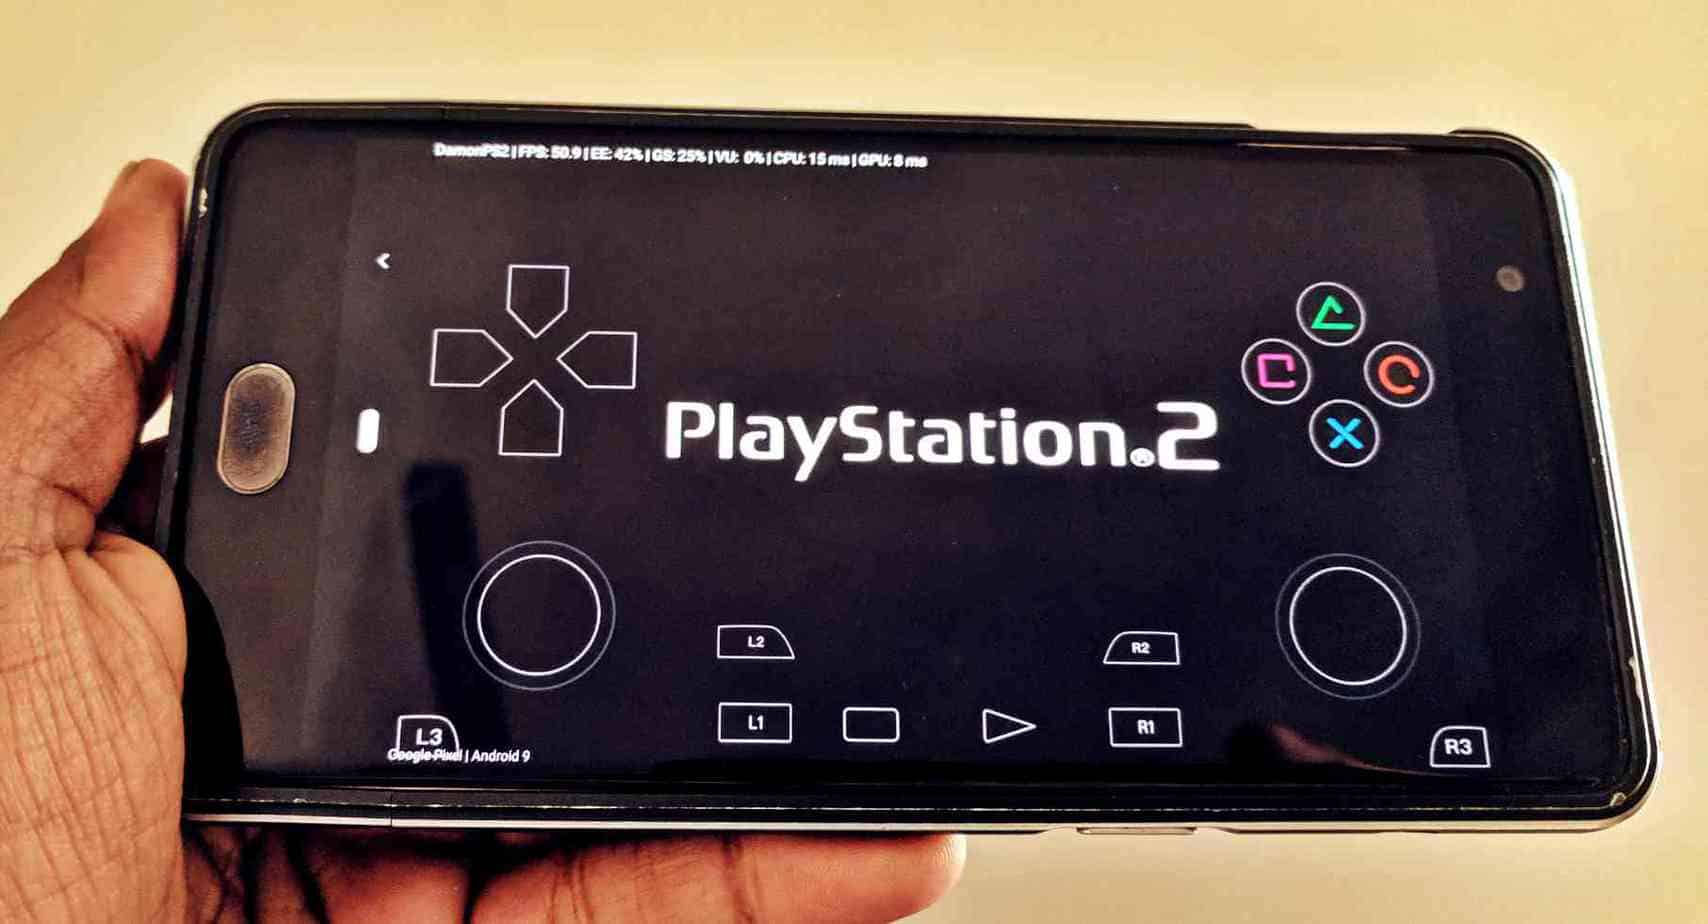 best playstation 2 emulator for android